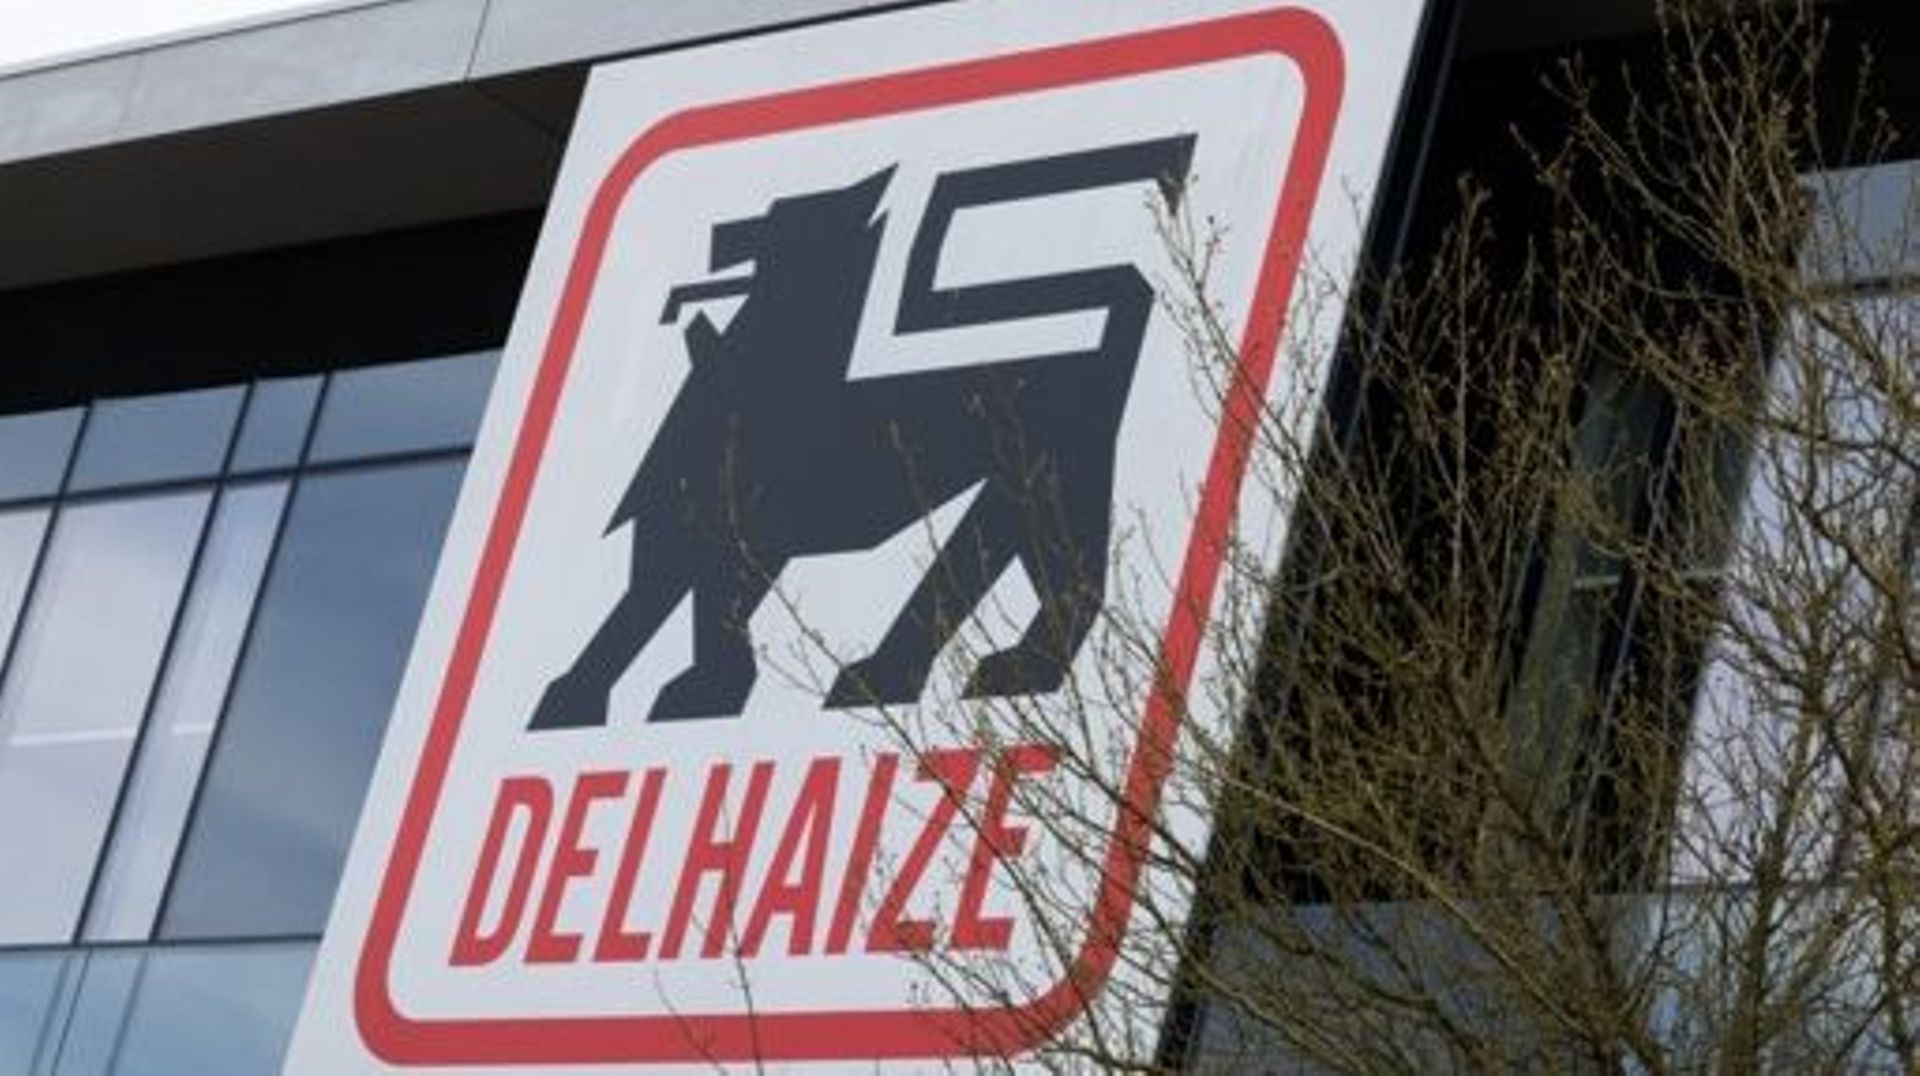 Illustration picture shows the Delhaize logo at the headquarters of supermarket chain Delhaize, in Zellik, Asse, Thursday 16 March 2023. The supermarket chain recently announced its plan to sell their remaining company-owned stores in Belgium, over 120 su